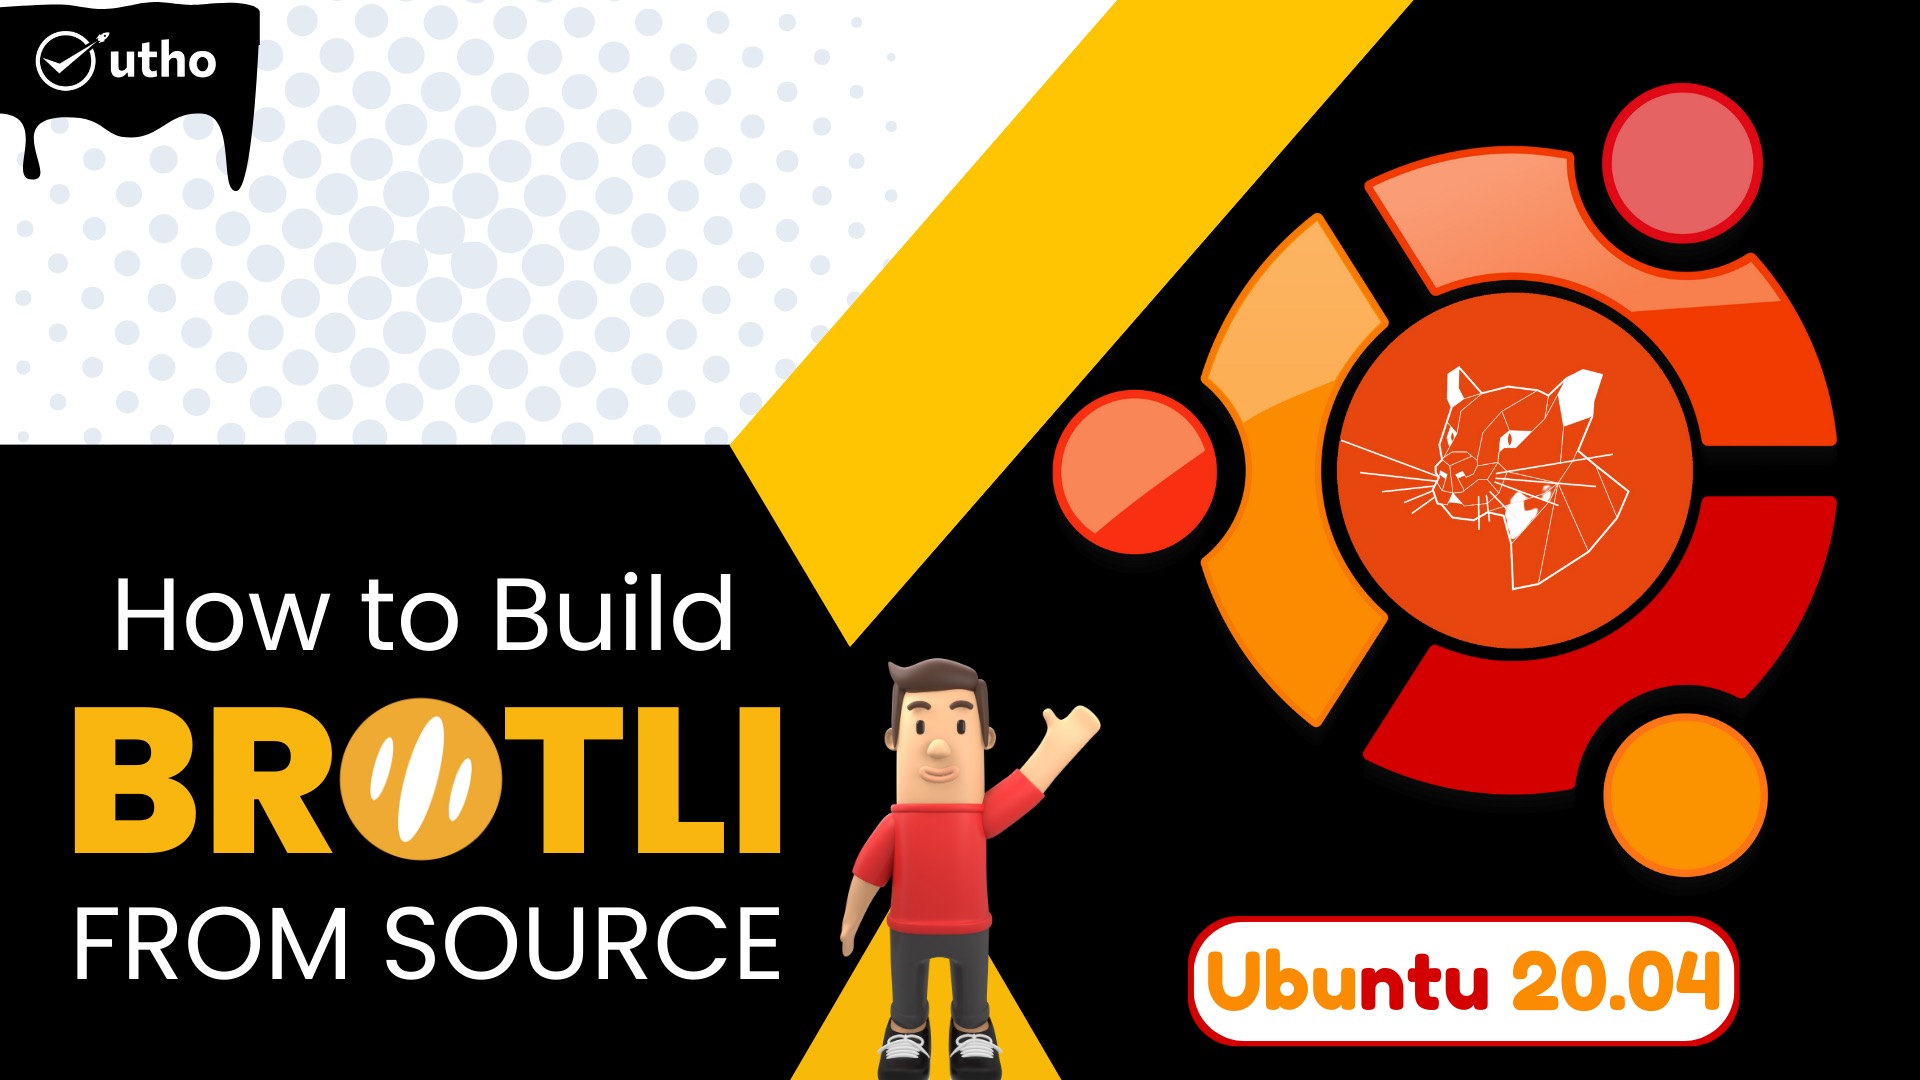 How to Build Brotli From Source on Ubuntu 20.04 LTS